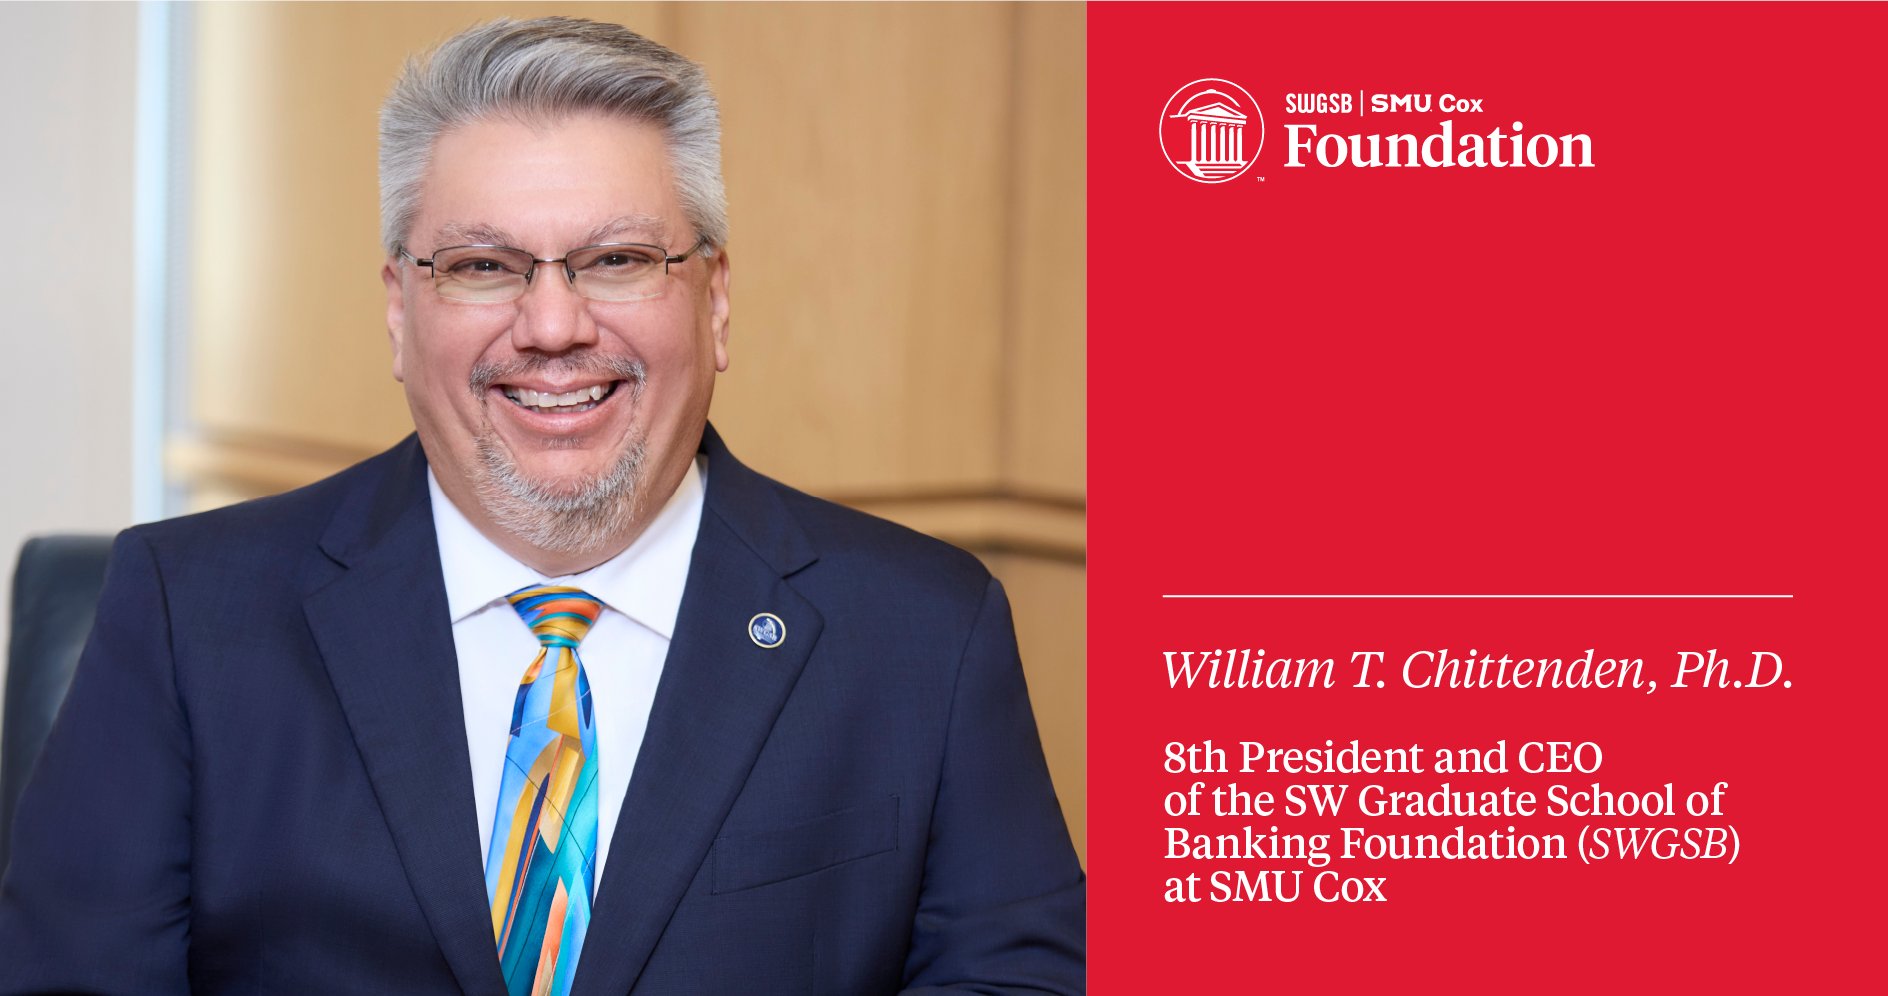 You are currently viewing Chittenden Named President and CEO of SWGSB